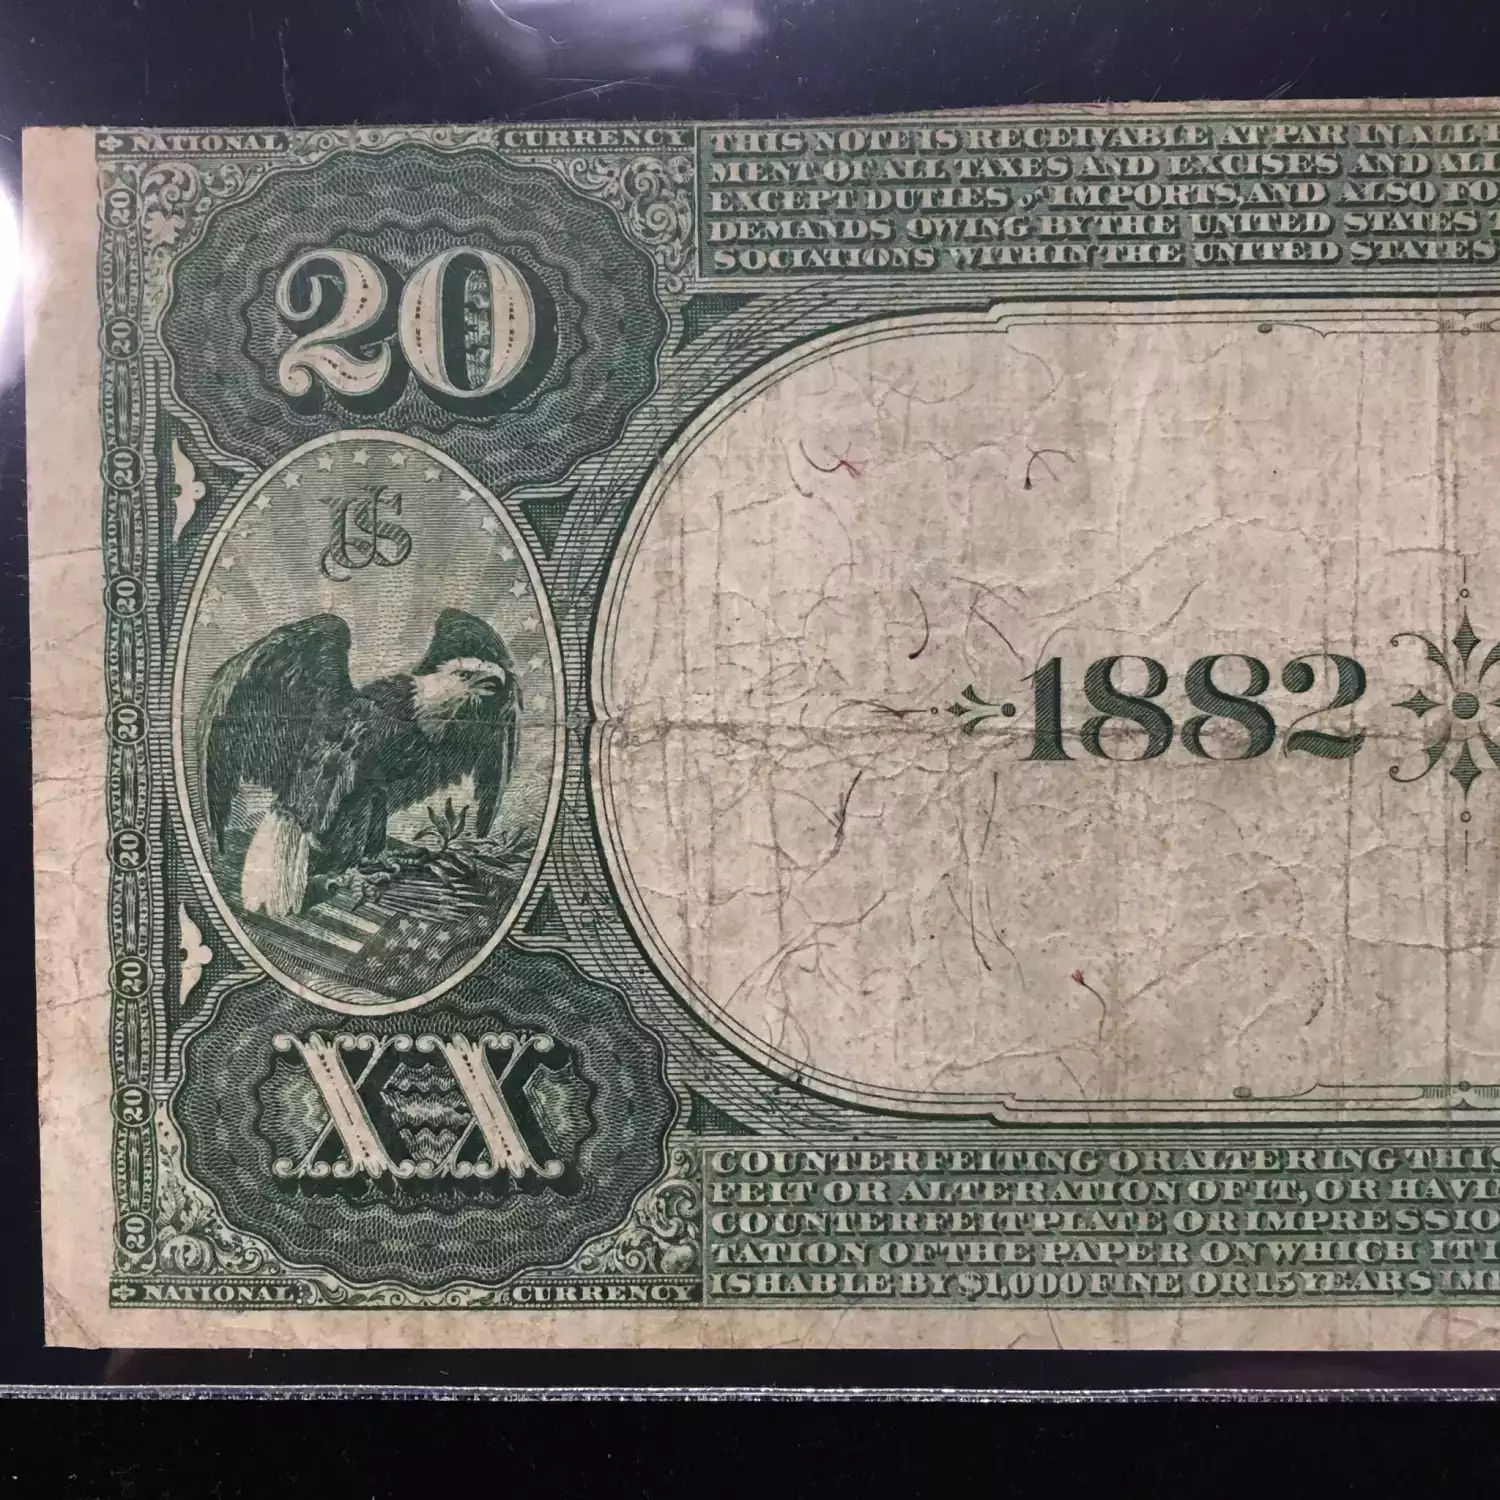 1882 DATE BACK $20 CLIFTON, AZ NATIONAL BANK NOTE #5821 – PCGS CURRENCY VERY FINE 20, small edge repairs